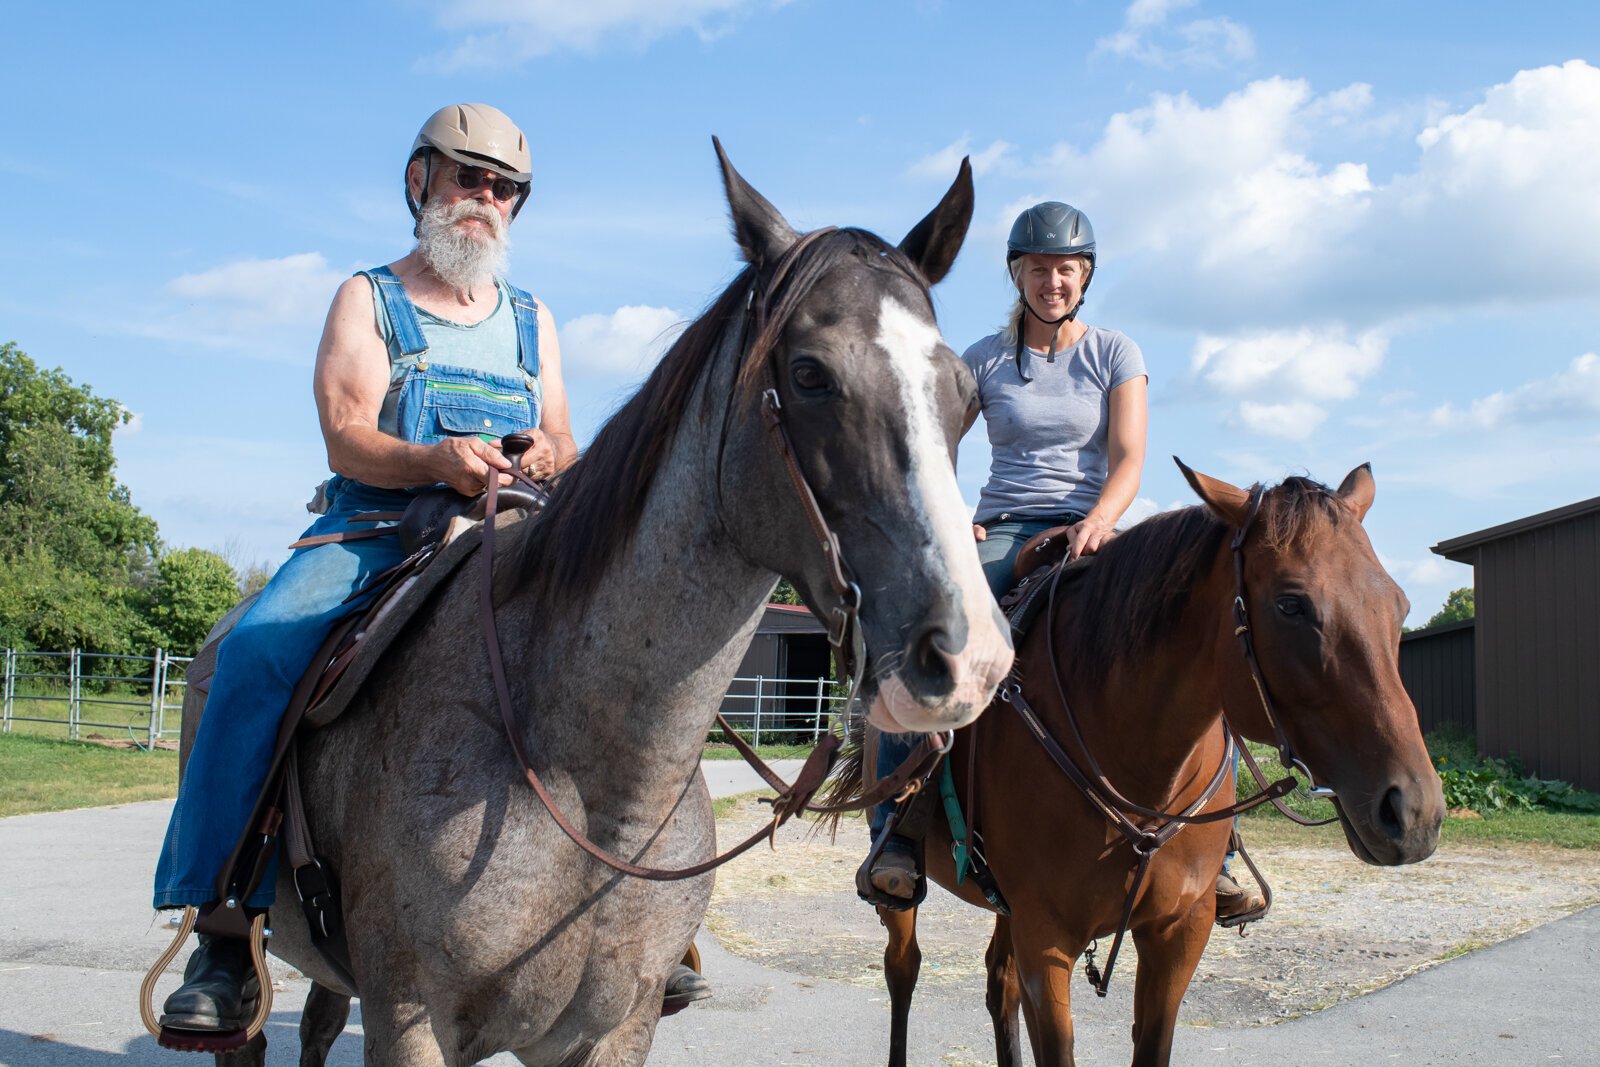 Fort Wayne’s first Trail to Zero ride this fall draws attention to the role equine therapy can play in preventing veteran suicide.